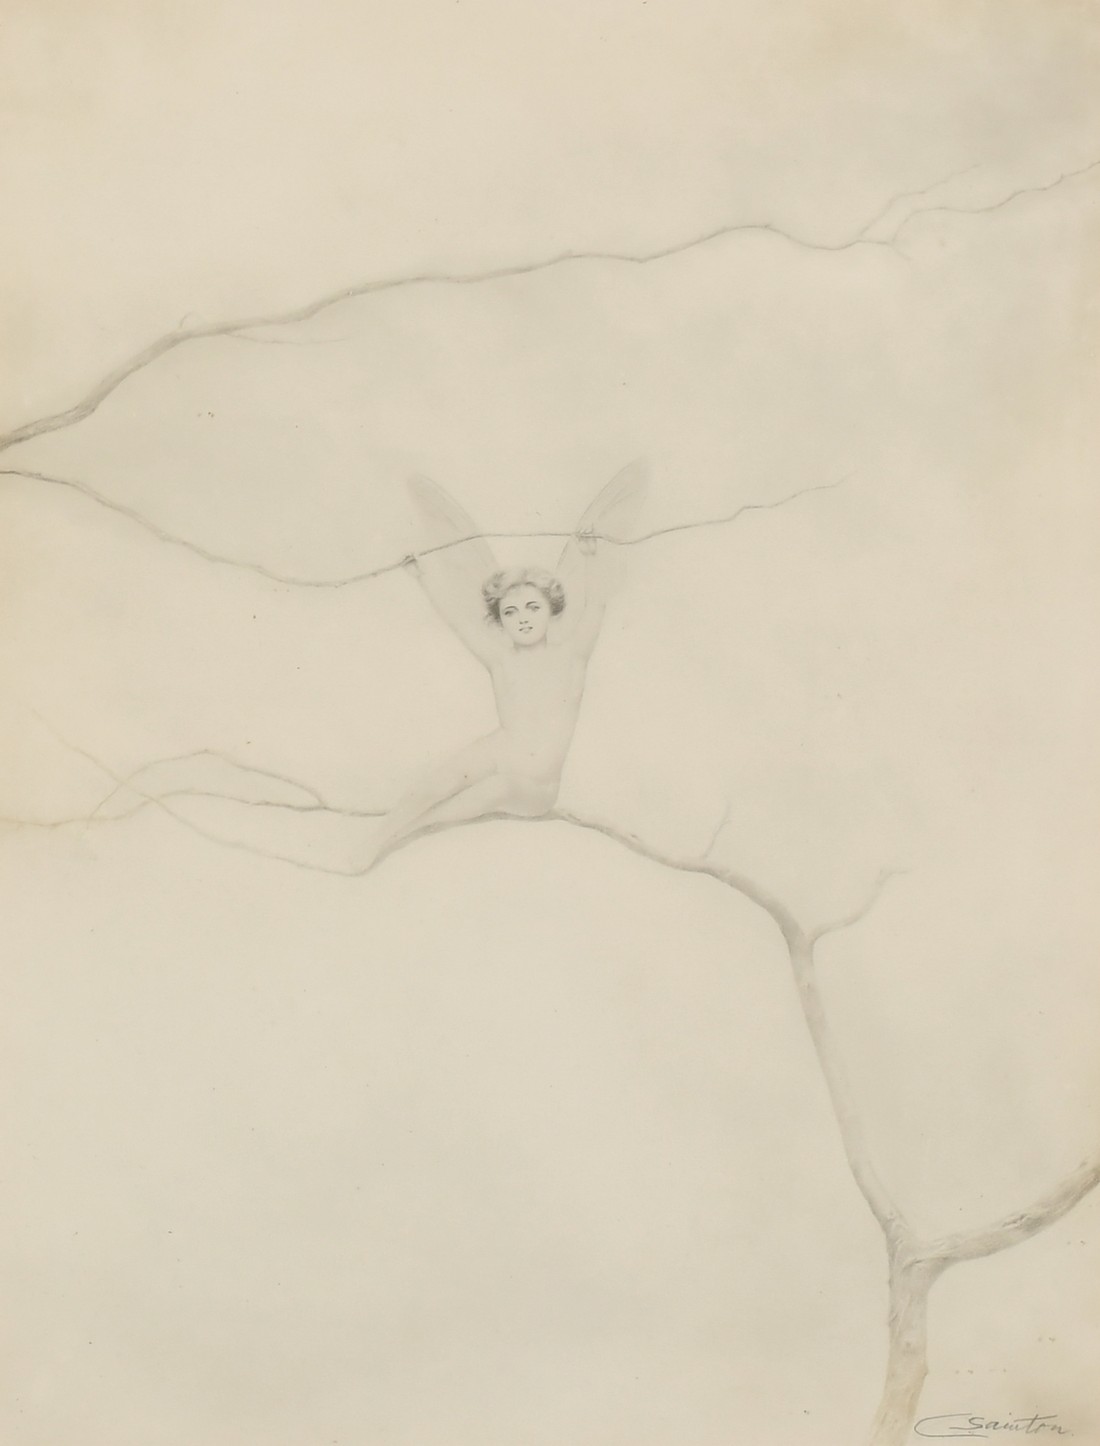 Charles Prosper Sainton (1861-1914), an angel on a branch, silverpoint drawing, signed in pencil,